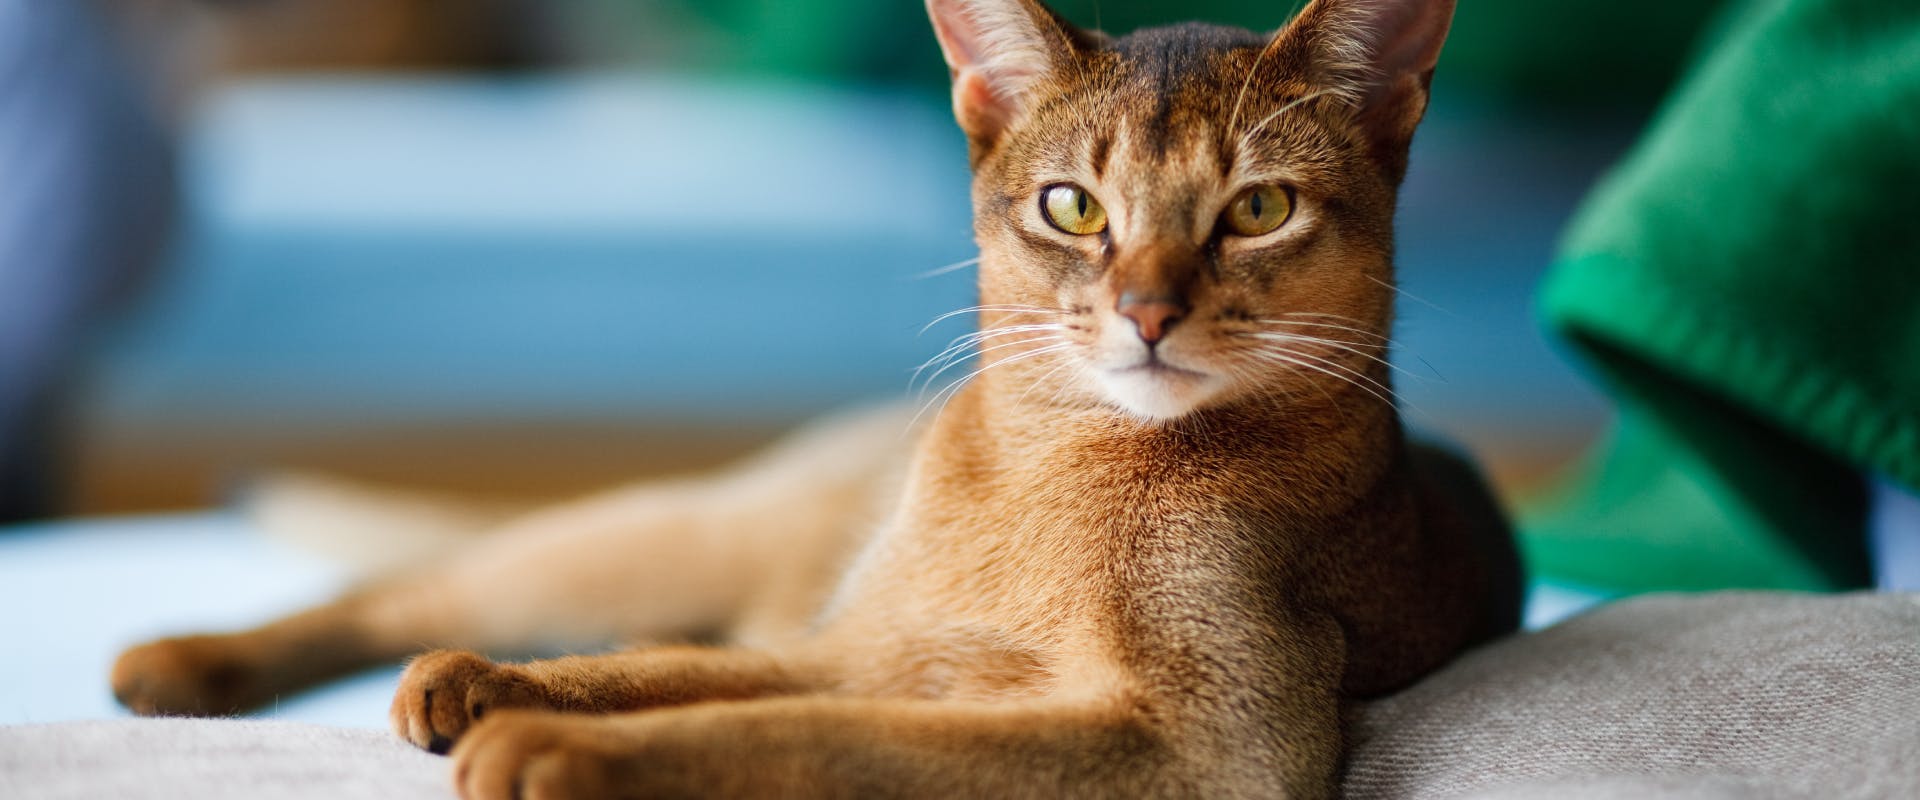 an Abyssinian Cat lying on a gray rug looking at the camera